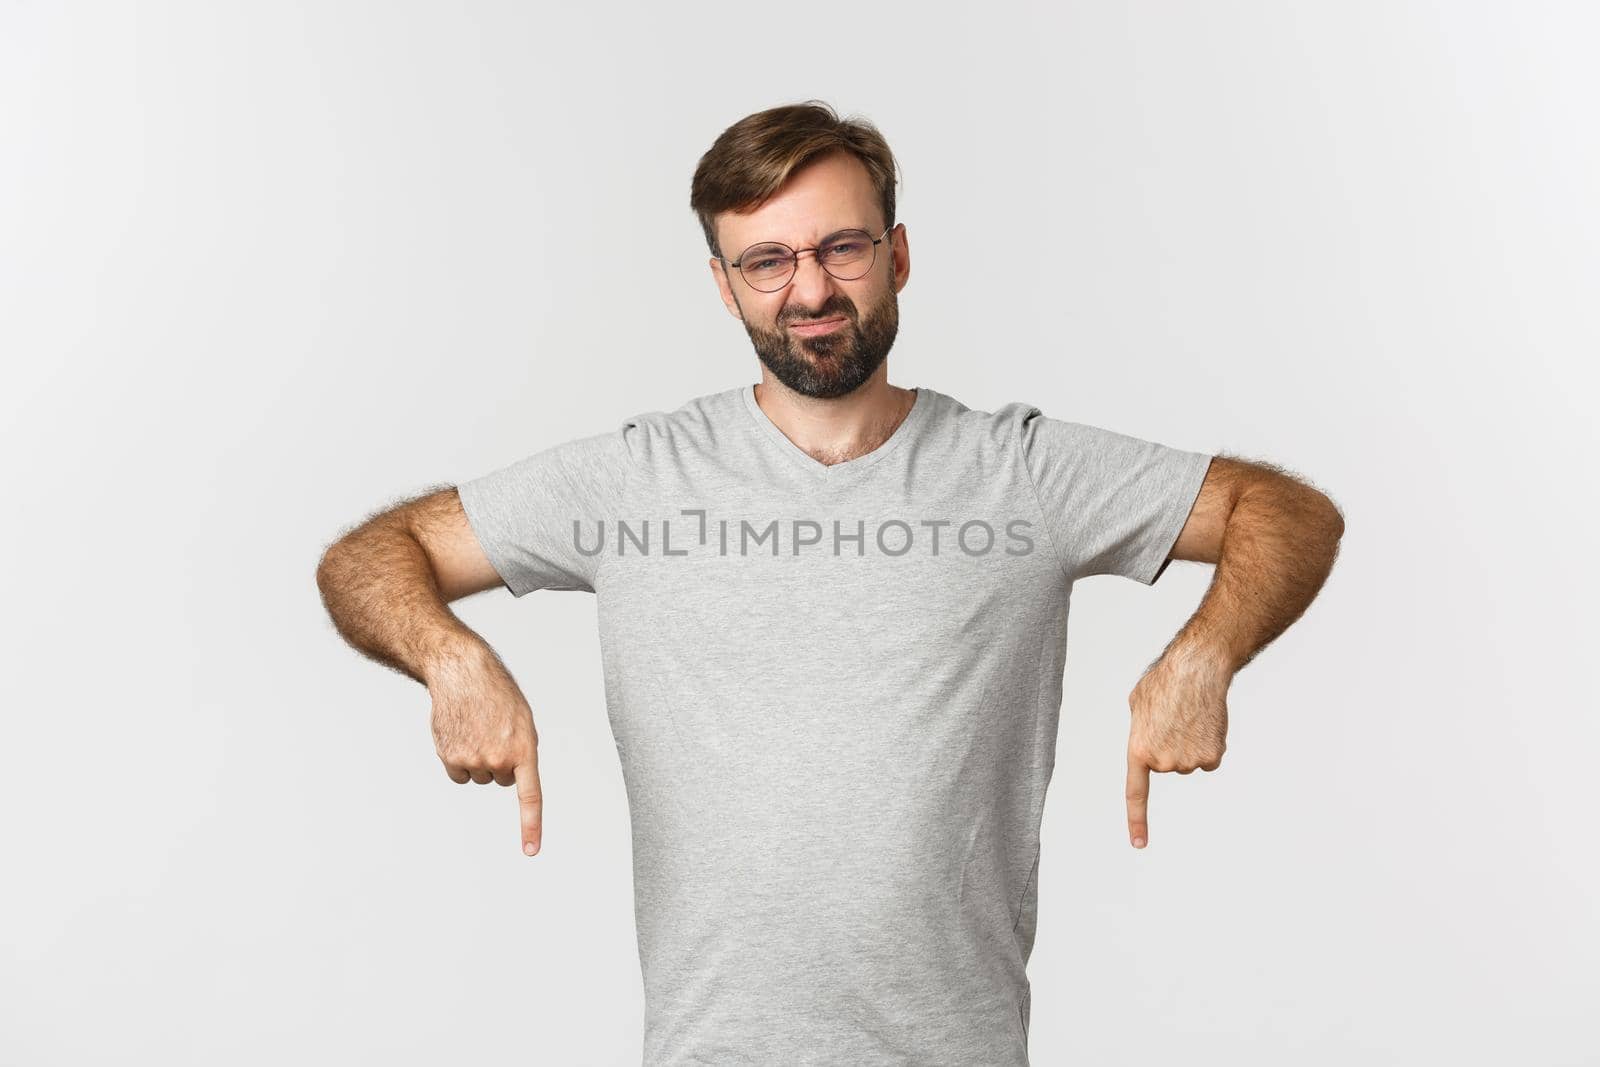 Disappointed bearded man grimacing, pointing fingers down, showing logo, wearing gray t-shirt, wearing gray t-shirt, standing over white background.